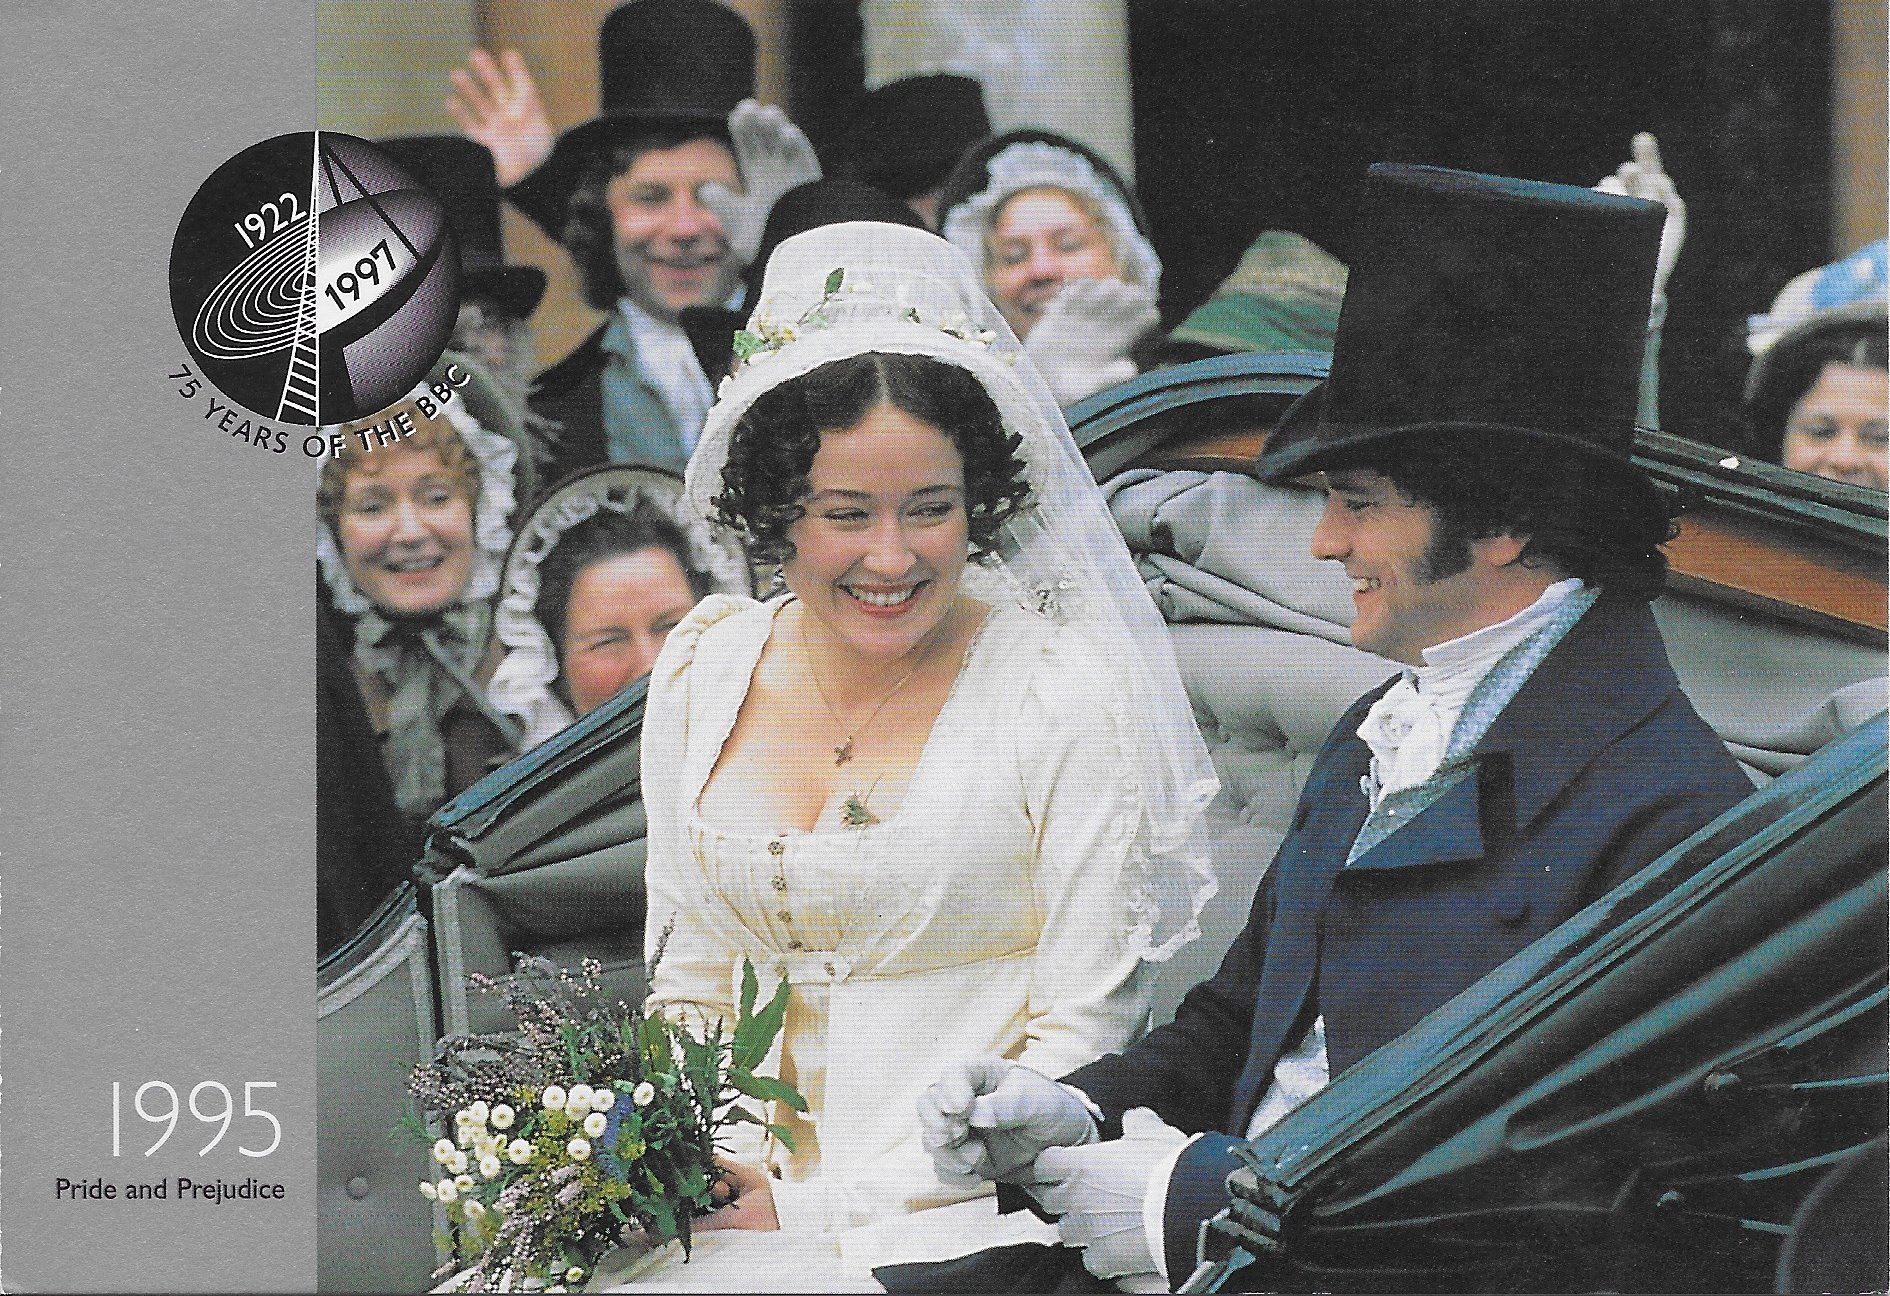 Picture of 75 years of the BBC - Pride and prejudice by artist Unknown from the BBC postcards - Records and Tapes library